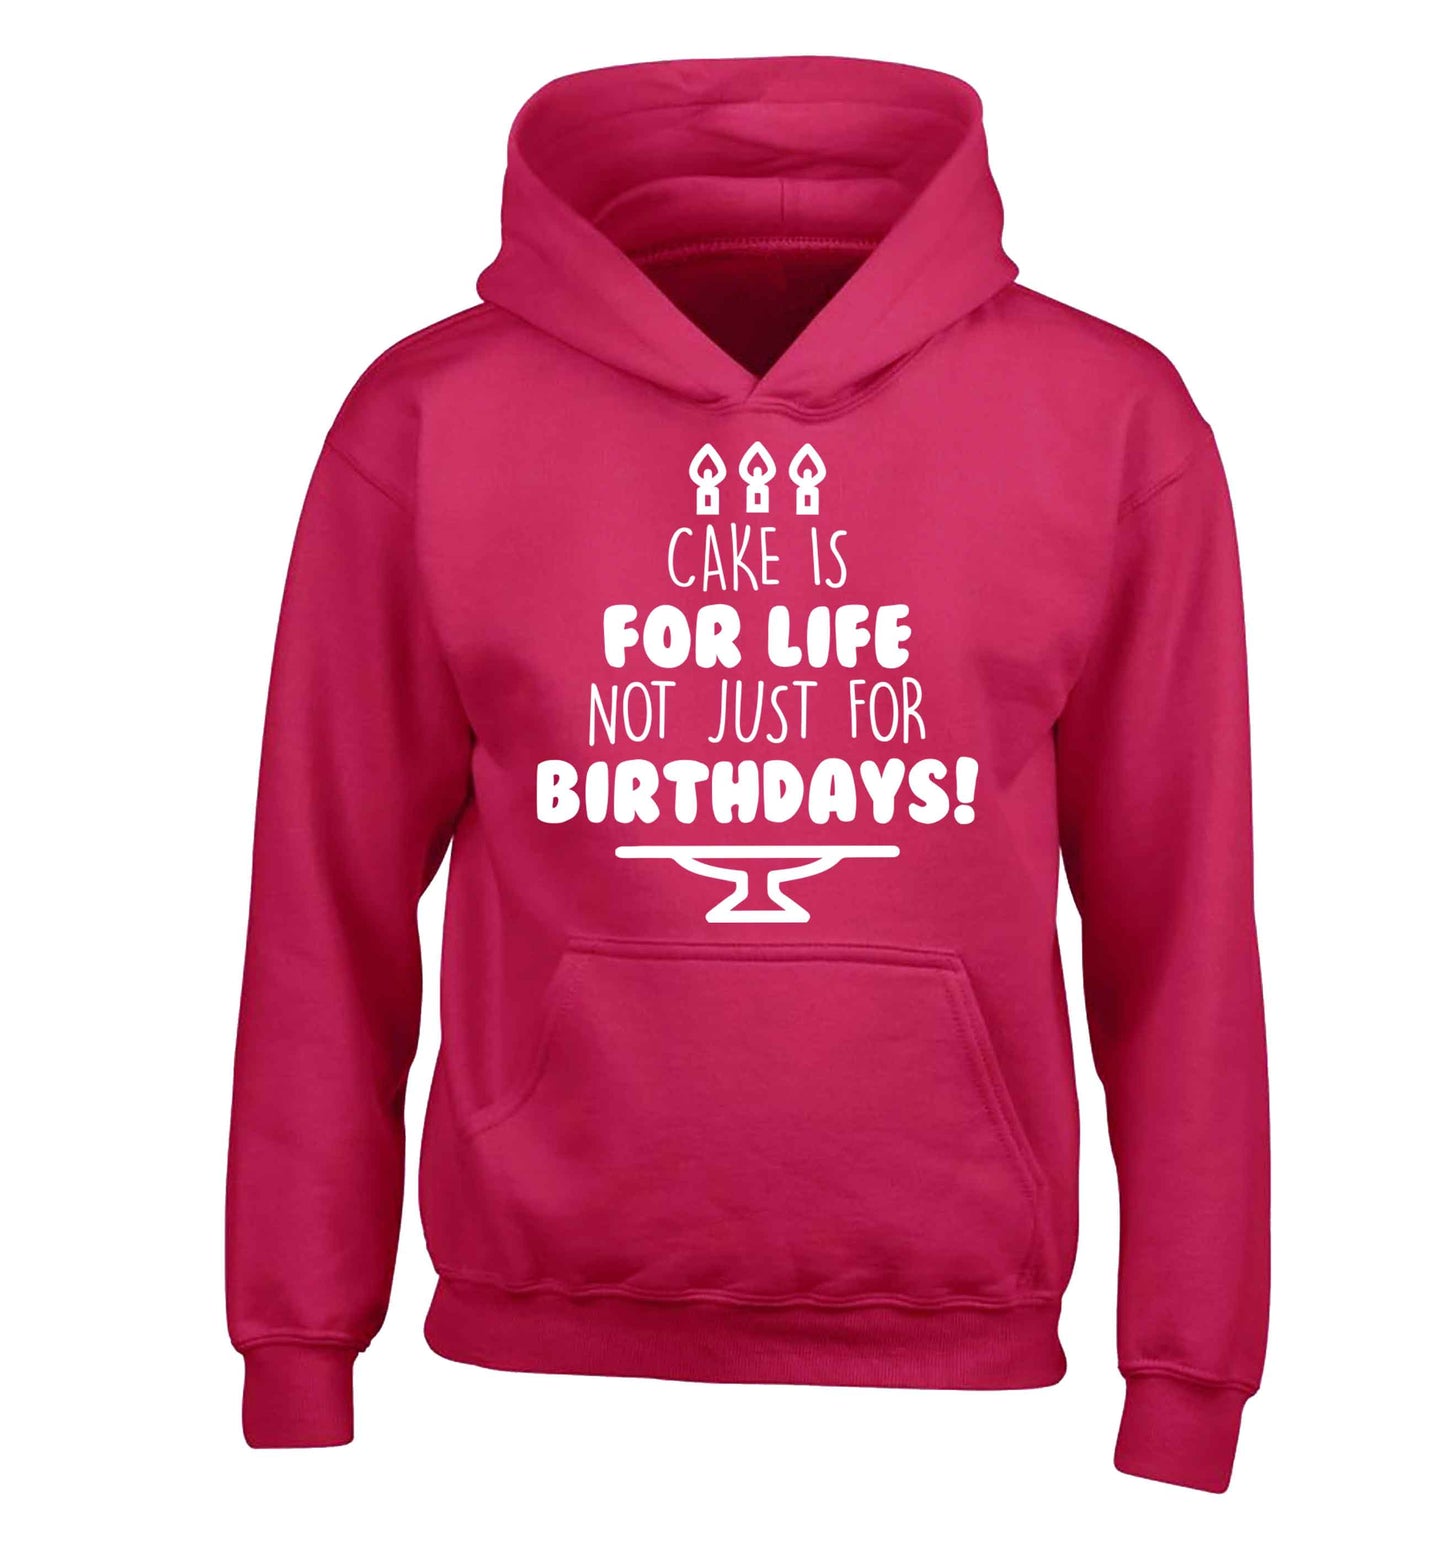 Cake is for life not just for birthdays children's pink hoodie 12-13 Years